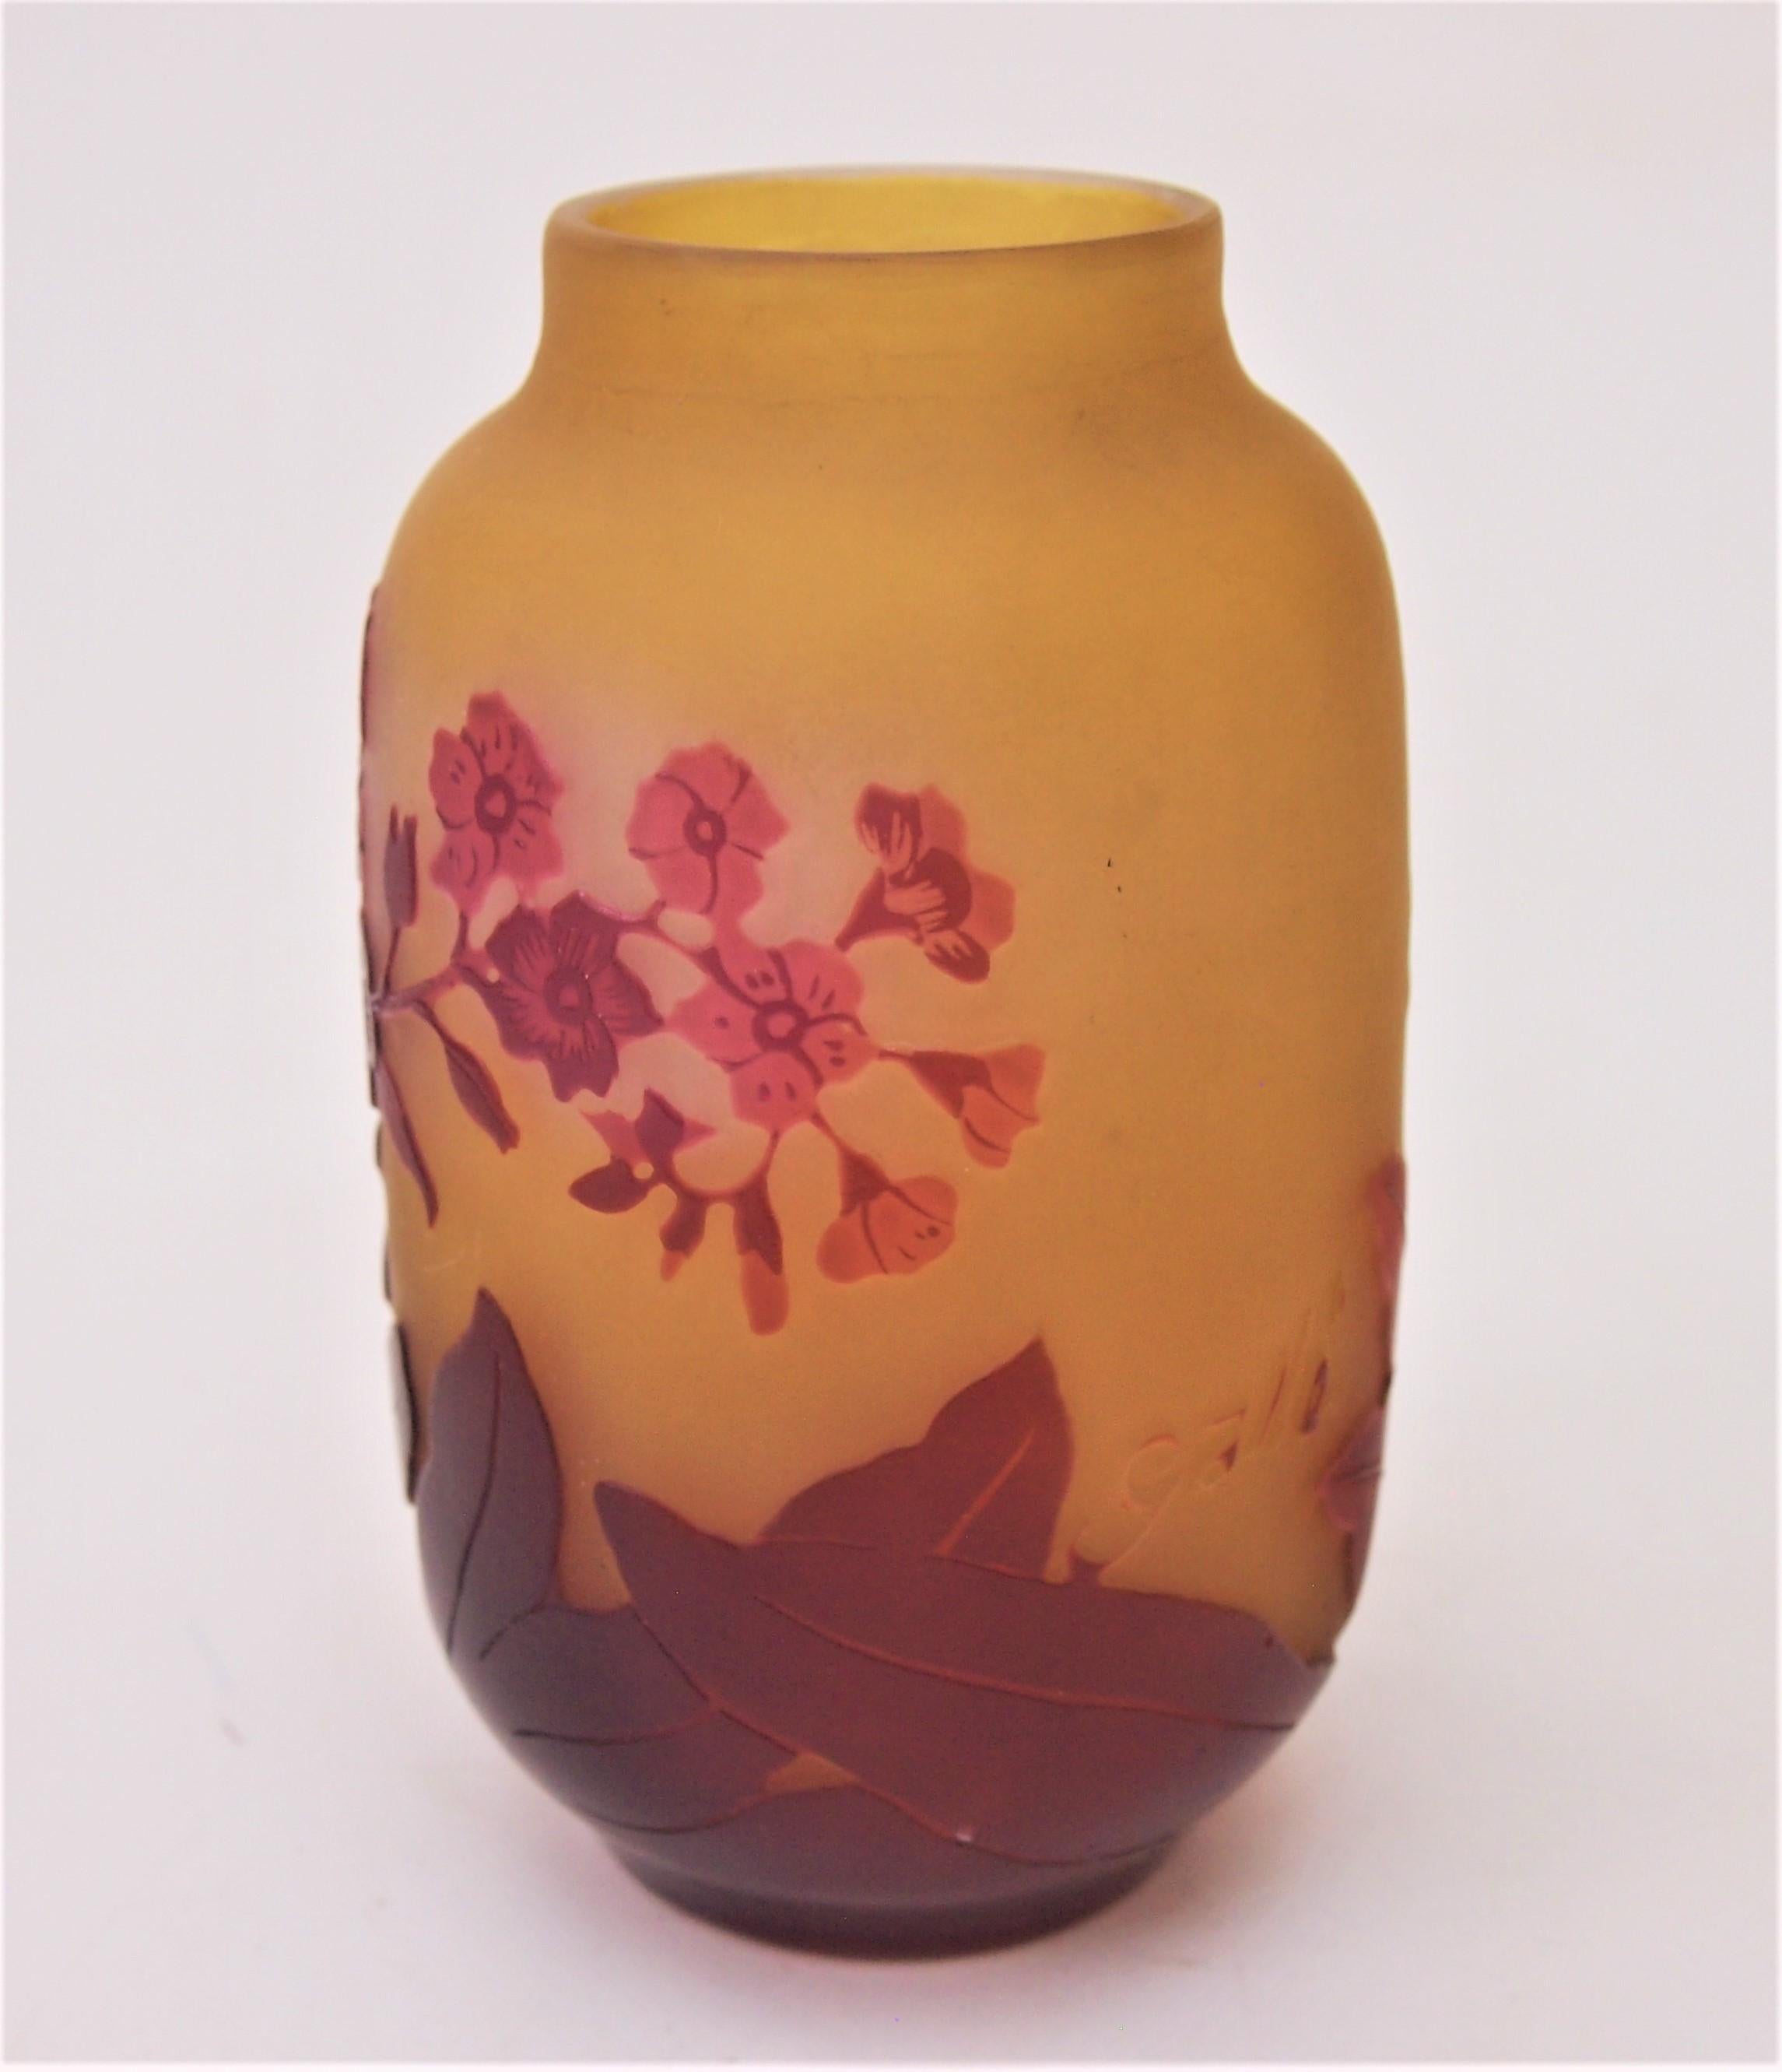 French Art Nouveau Emile Gallé small cameo vase depicting flowers in reds over orange, with fine internal polishing to highlight the red in the daises, (this is sometimes called window pane technique one of the more complex techniques Galle employed